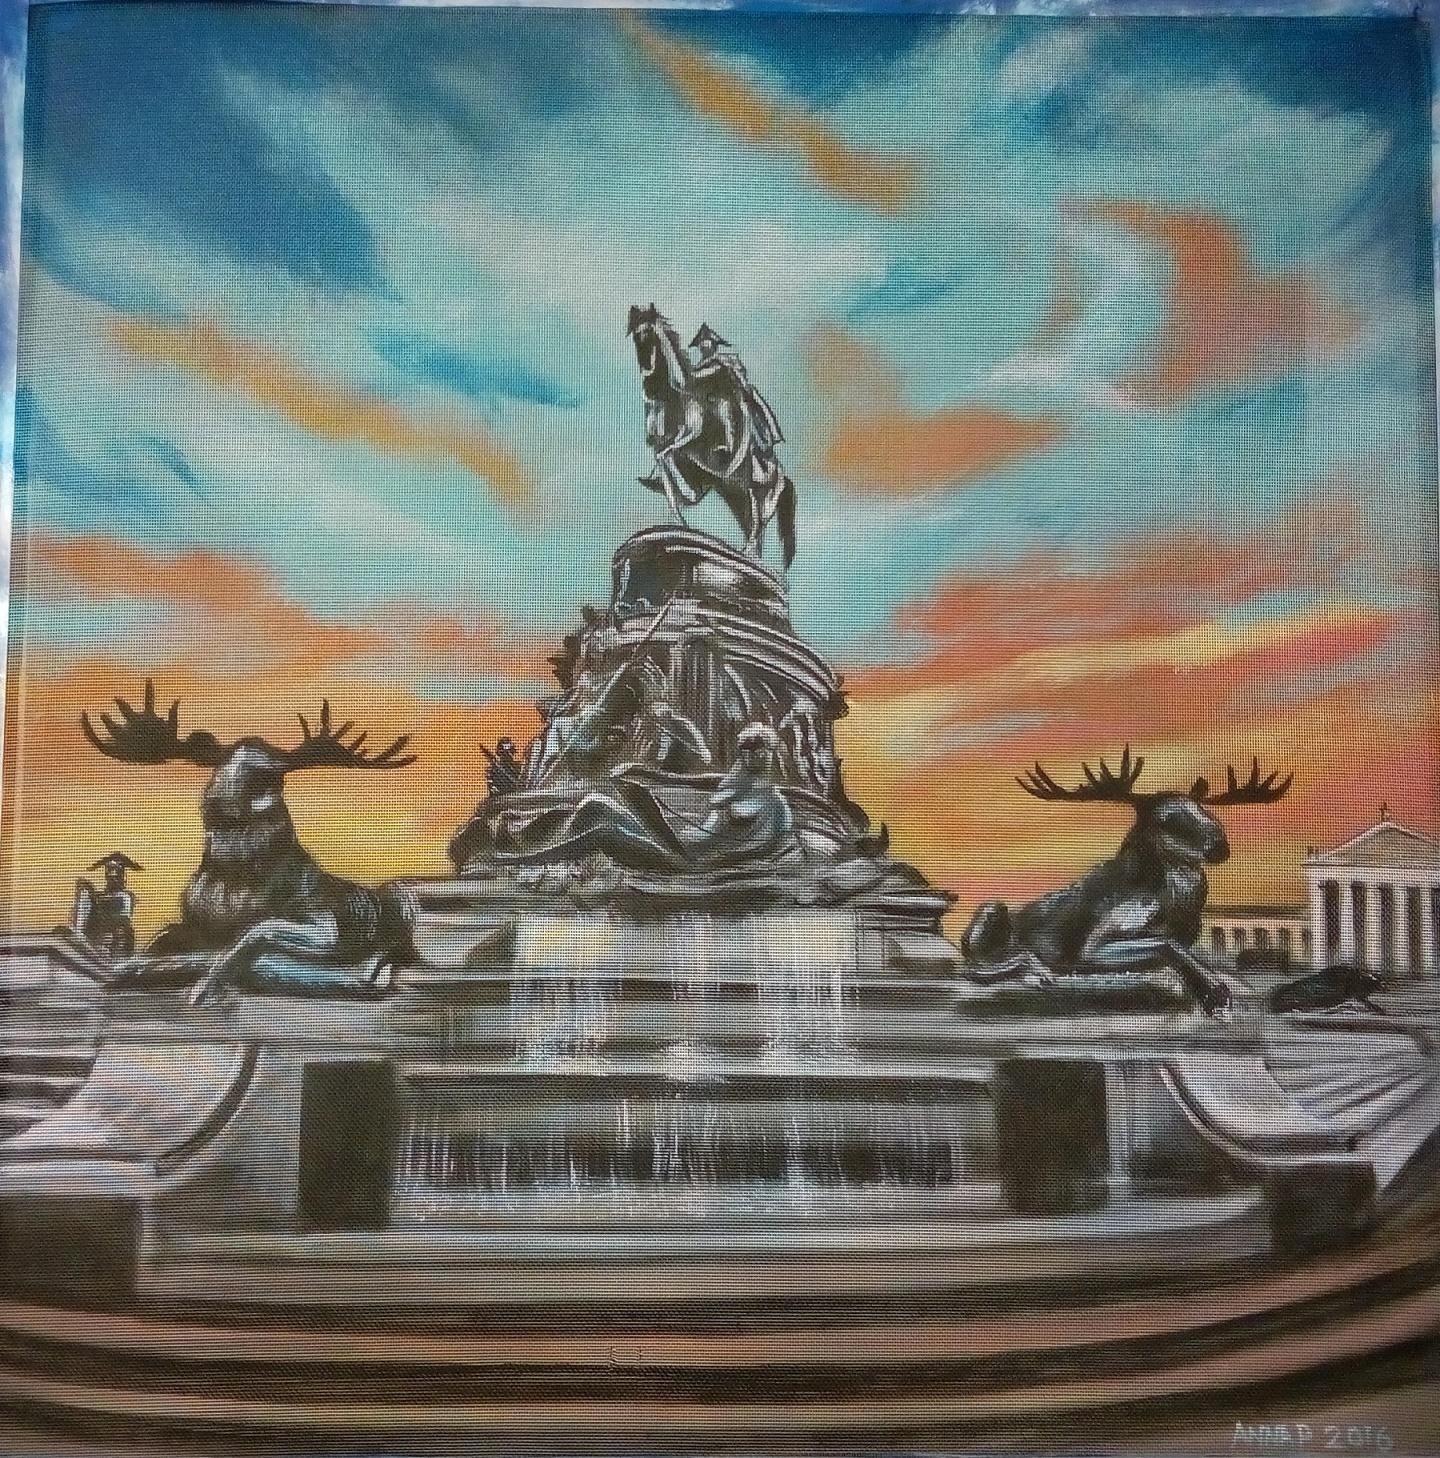 Painted window screen of the George Washington Monument Fountain at Philadelphia Museum of Art